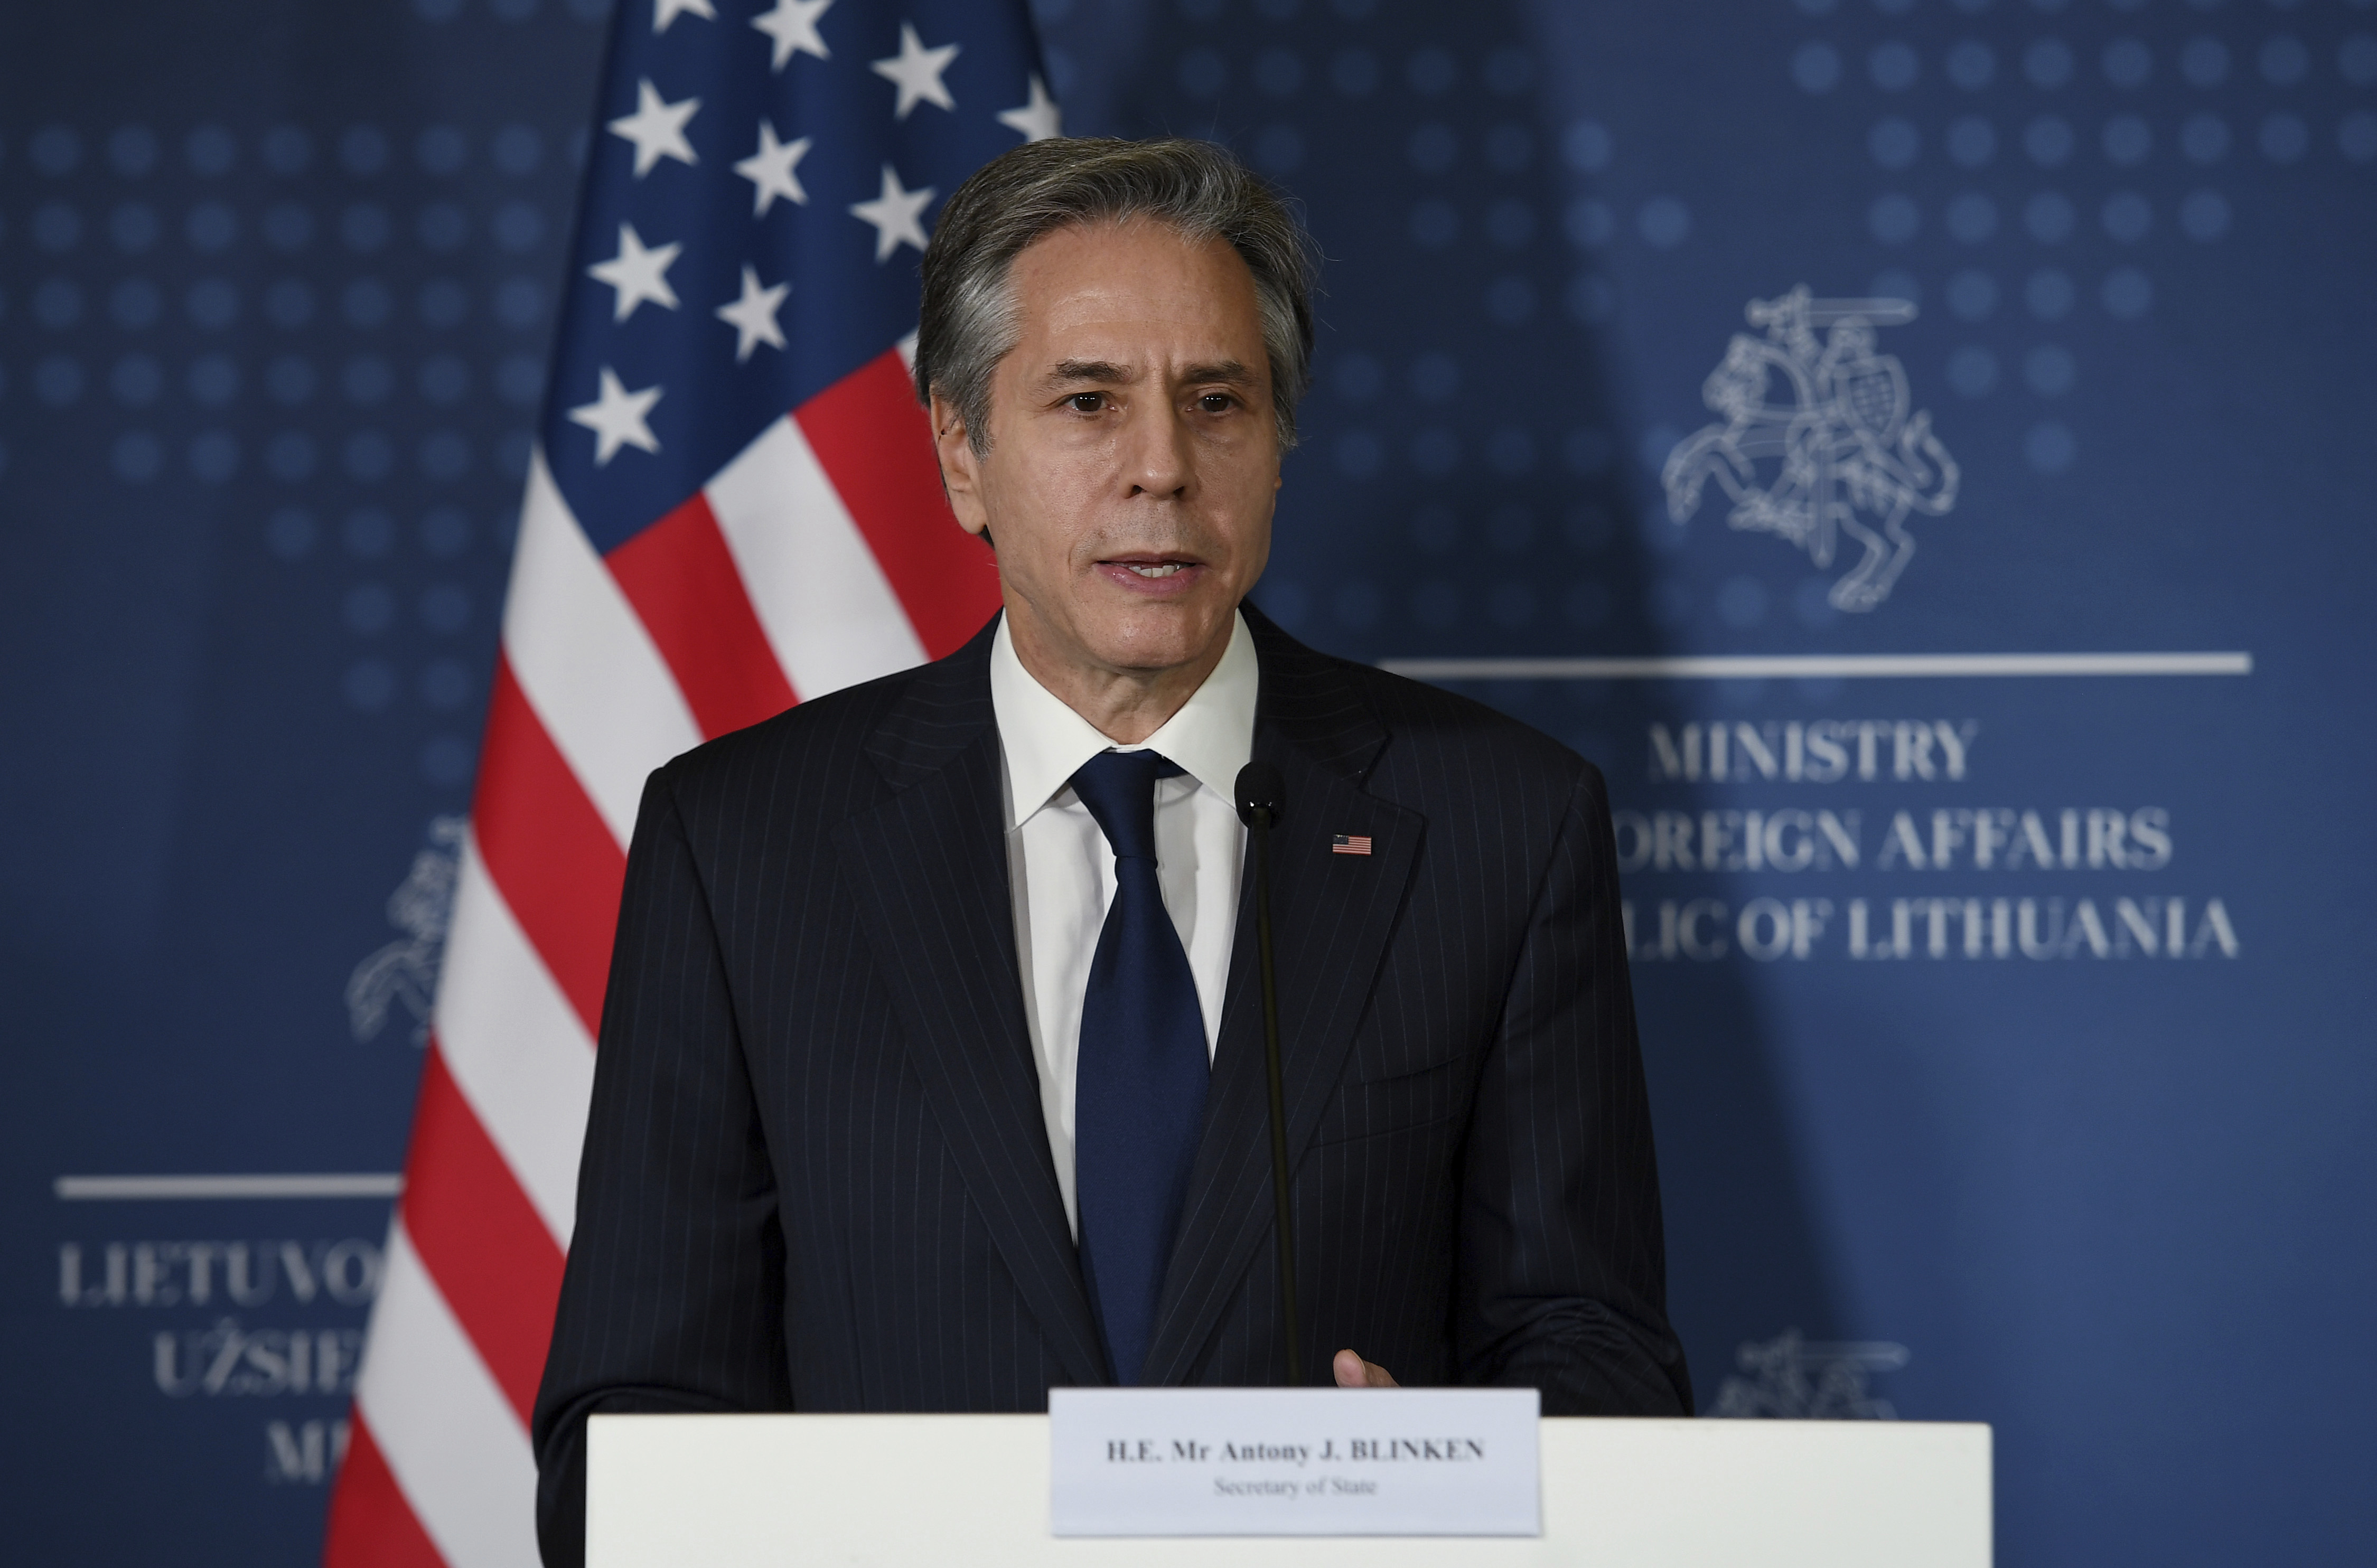 US Secretary of State Antony Blinken speaks during a joint news conference with Lithuanian Foreign Minister Gabrielus Landsbergis in Vilnius, Lithuania, on March 7.